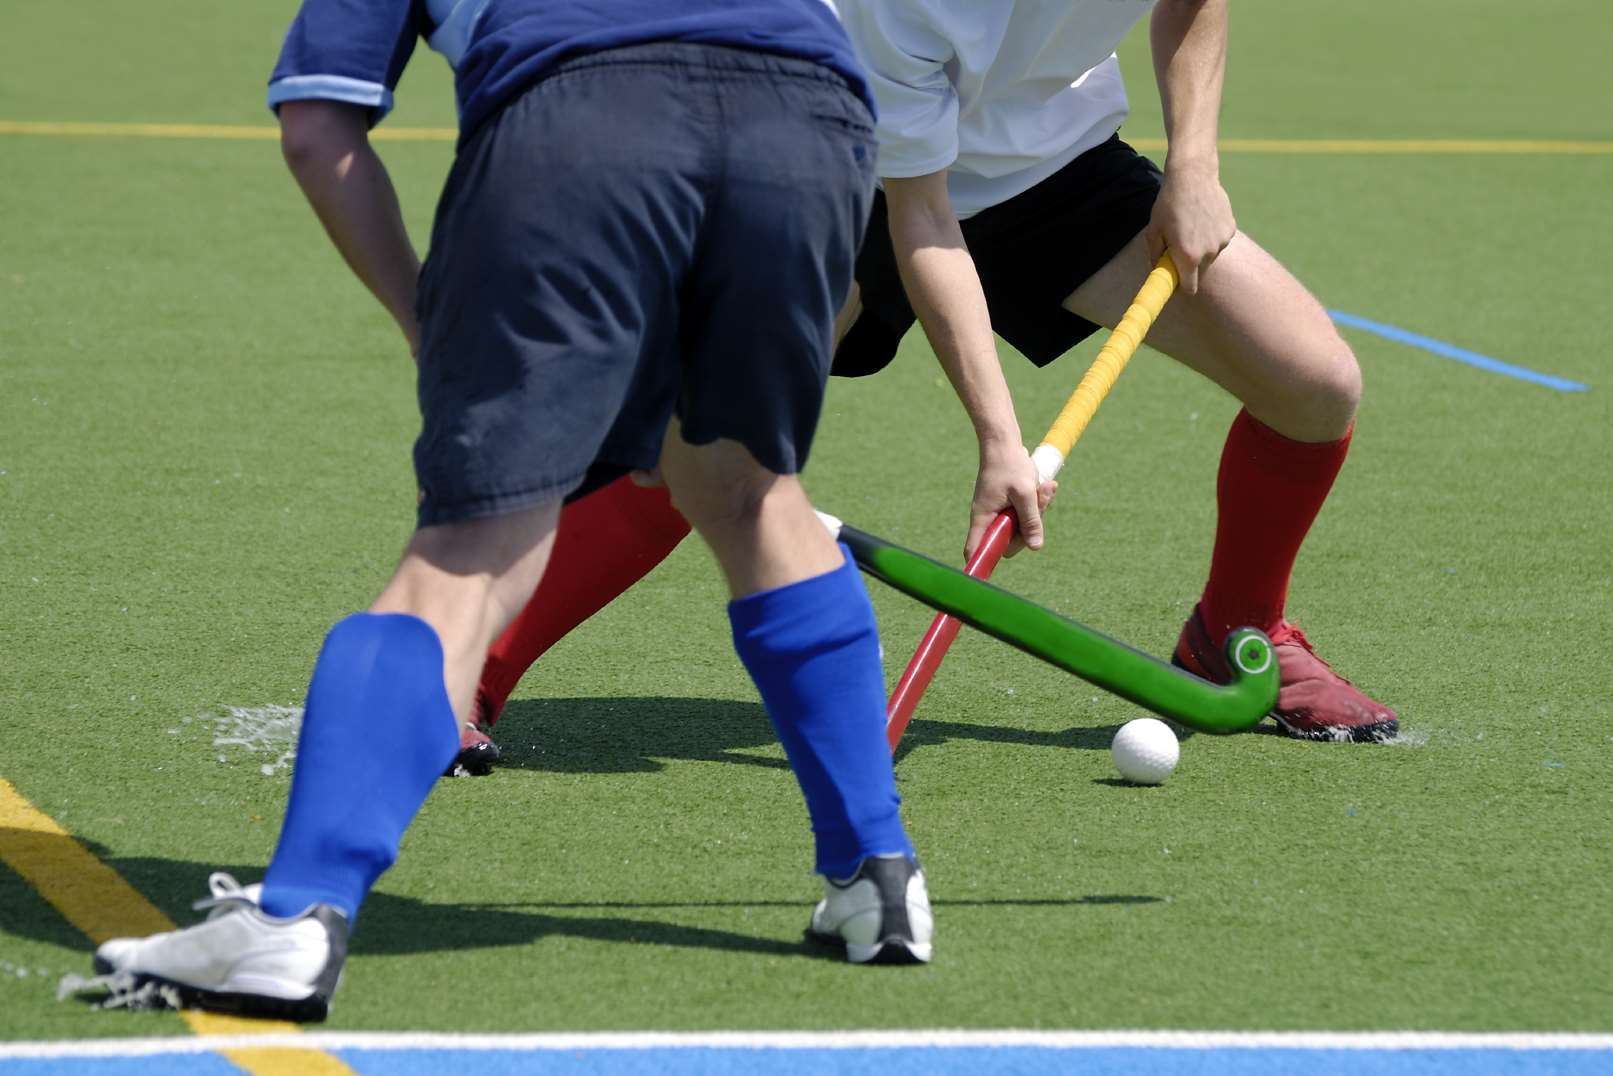 Tell the opposition to bully off with a quick game of hockey